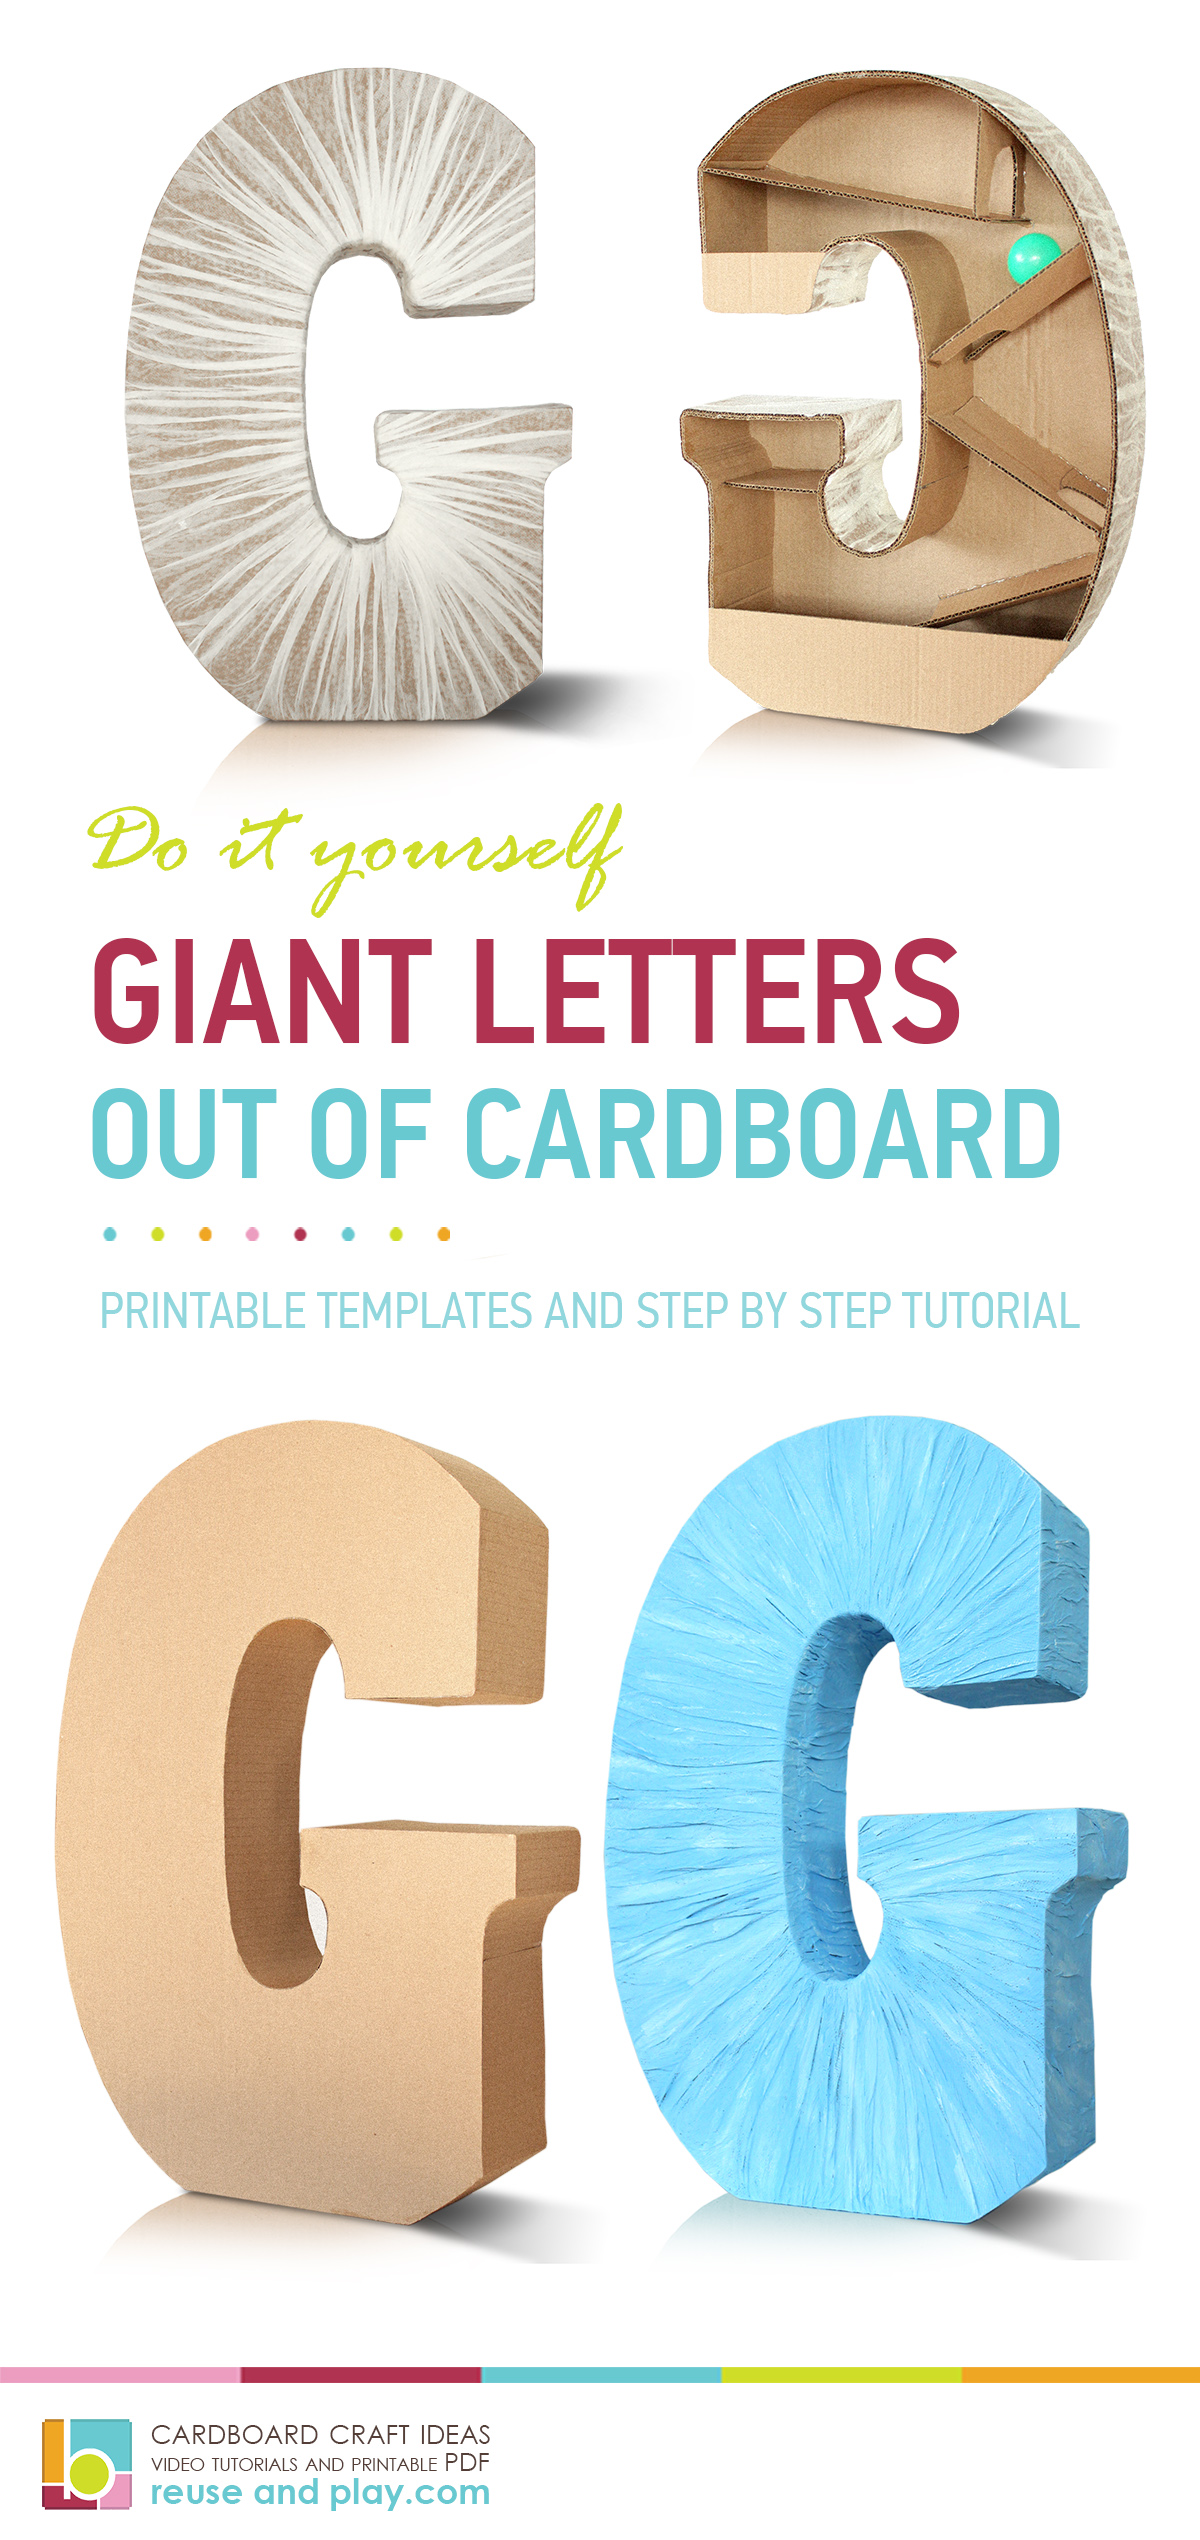 How to make Giant Cardboard Letters Tutorial with templates